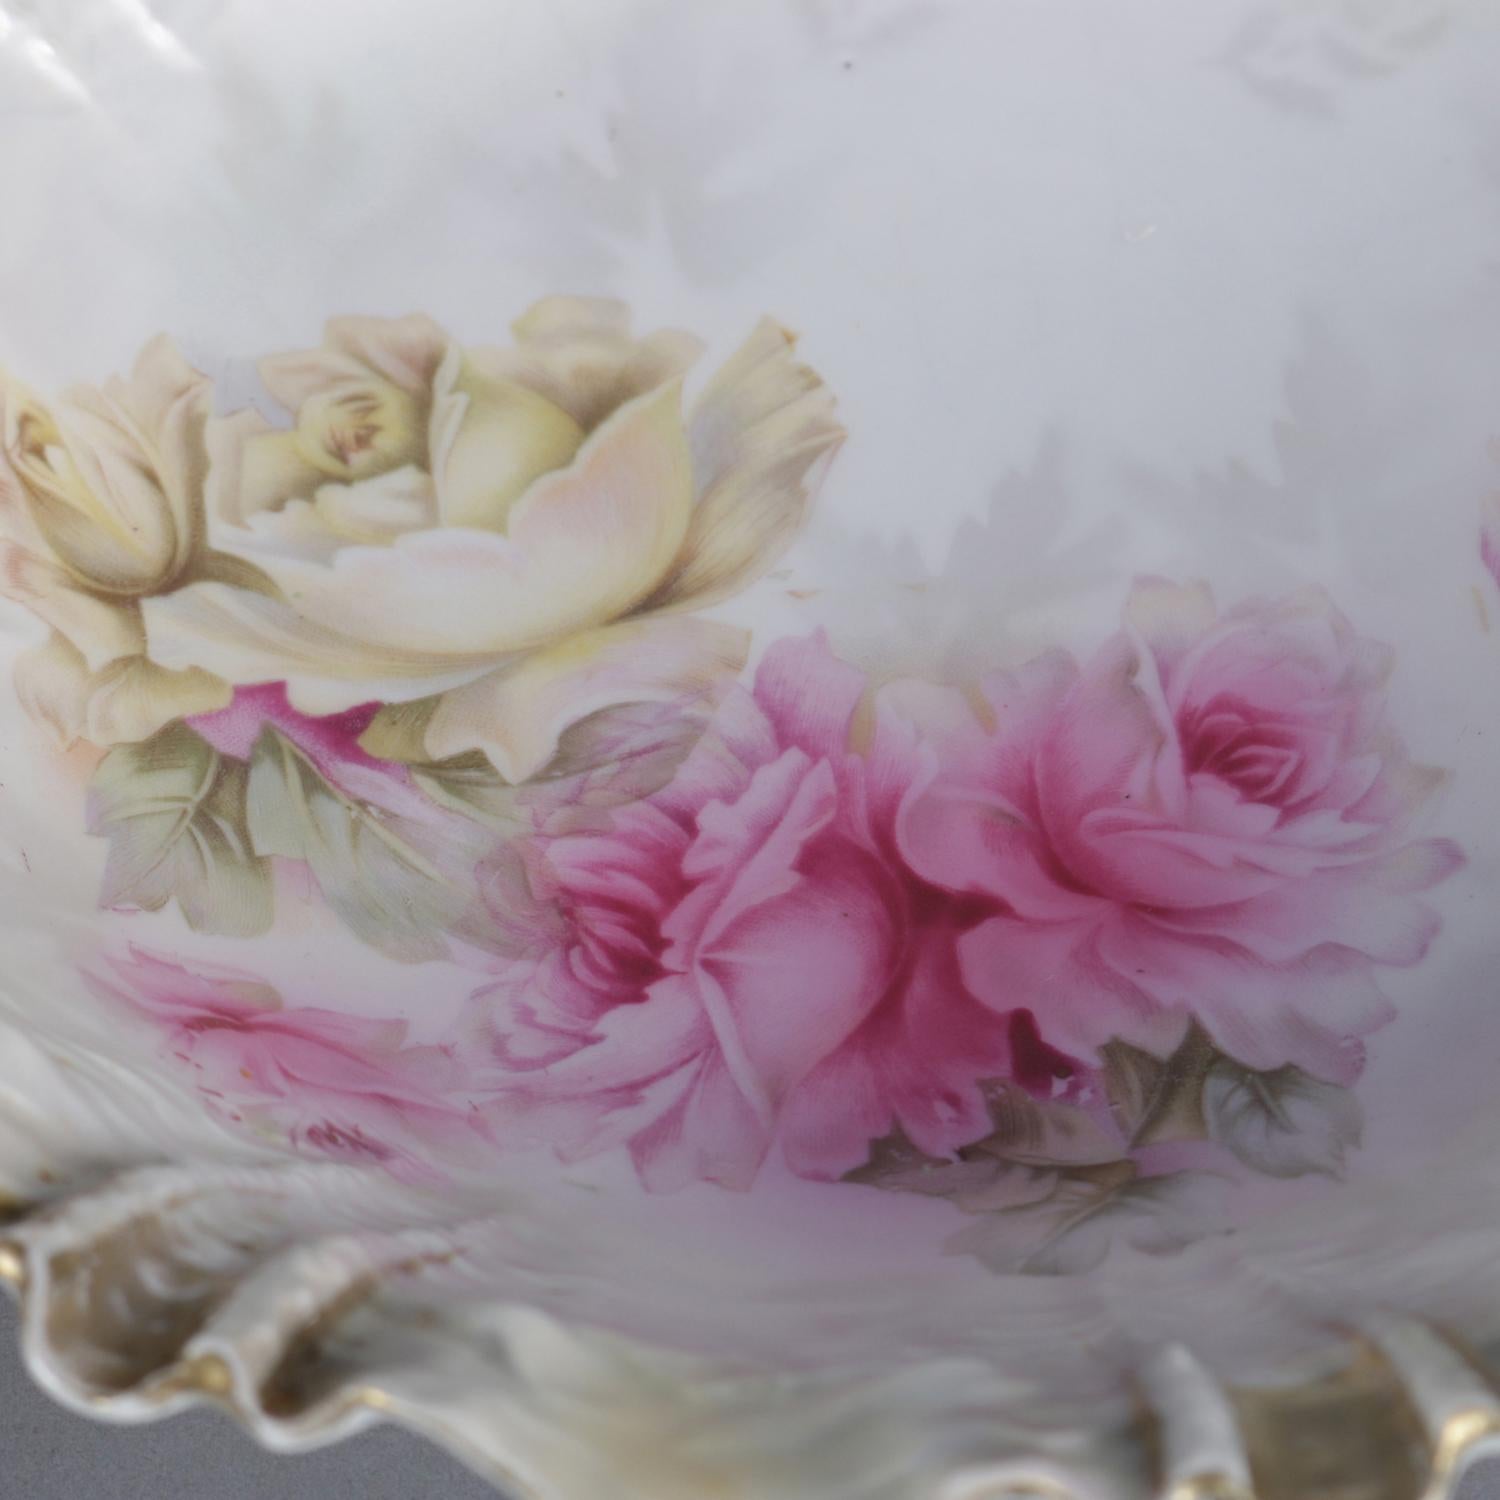 Antique R.S. Prussia porcelain center bowl features ruffled rim and has hand painted floral rose design with gilt highlights and pearled finish, en verso RS Prussia wreath stamp, circa 1900


Measures : 2.75